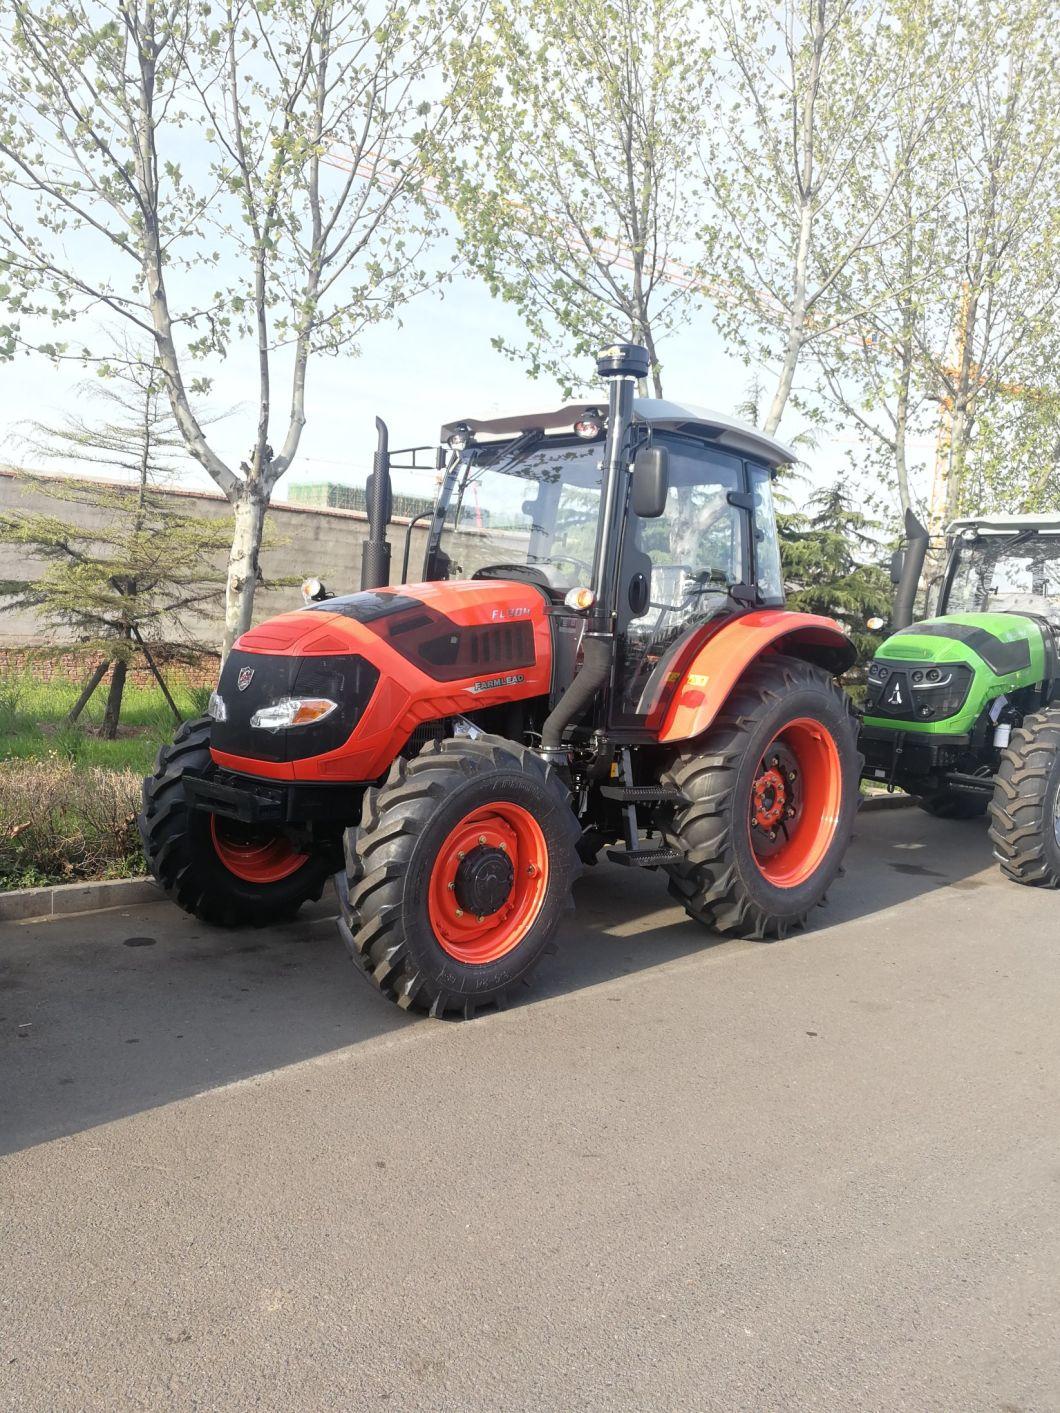 Multiply Functional Compact Tractor Agricultural Farm Tractor FL704